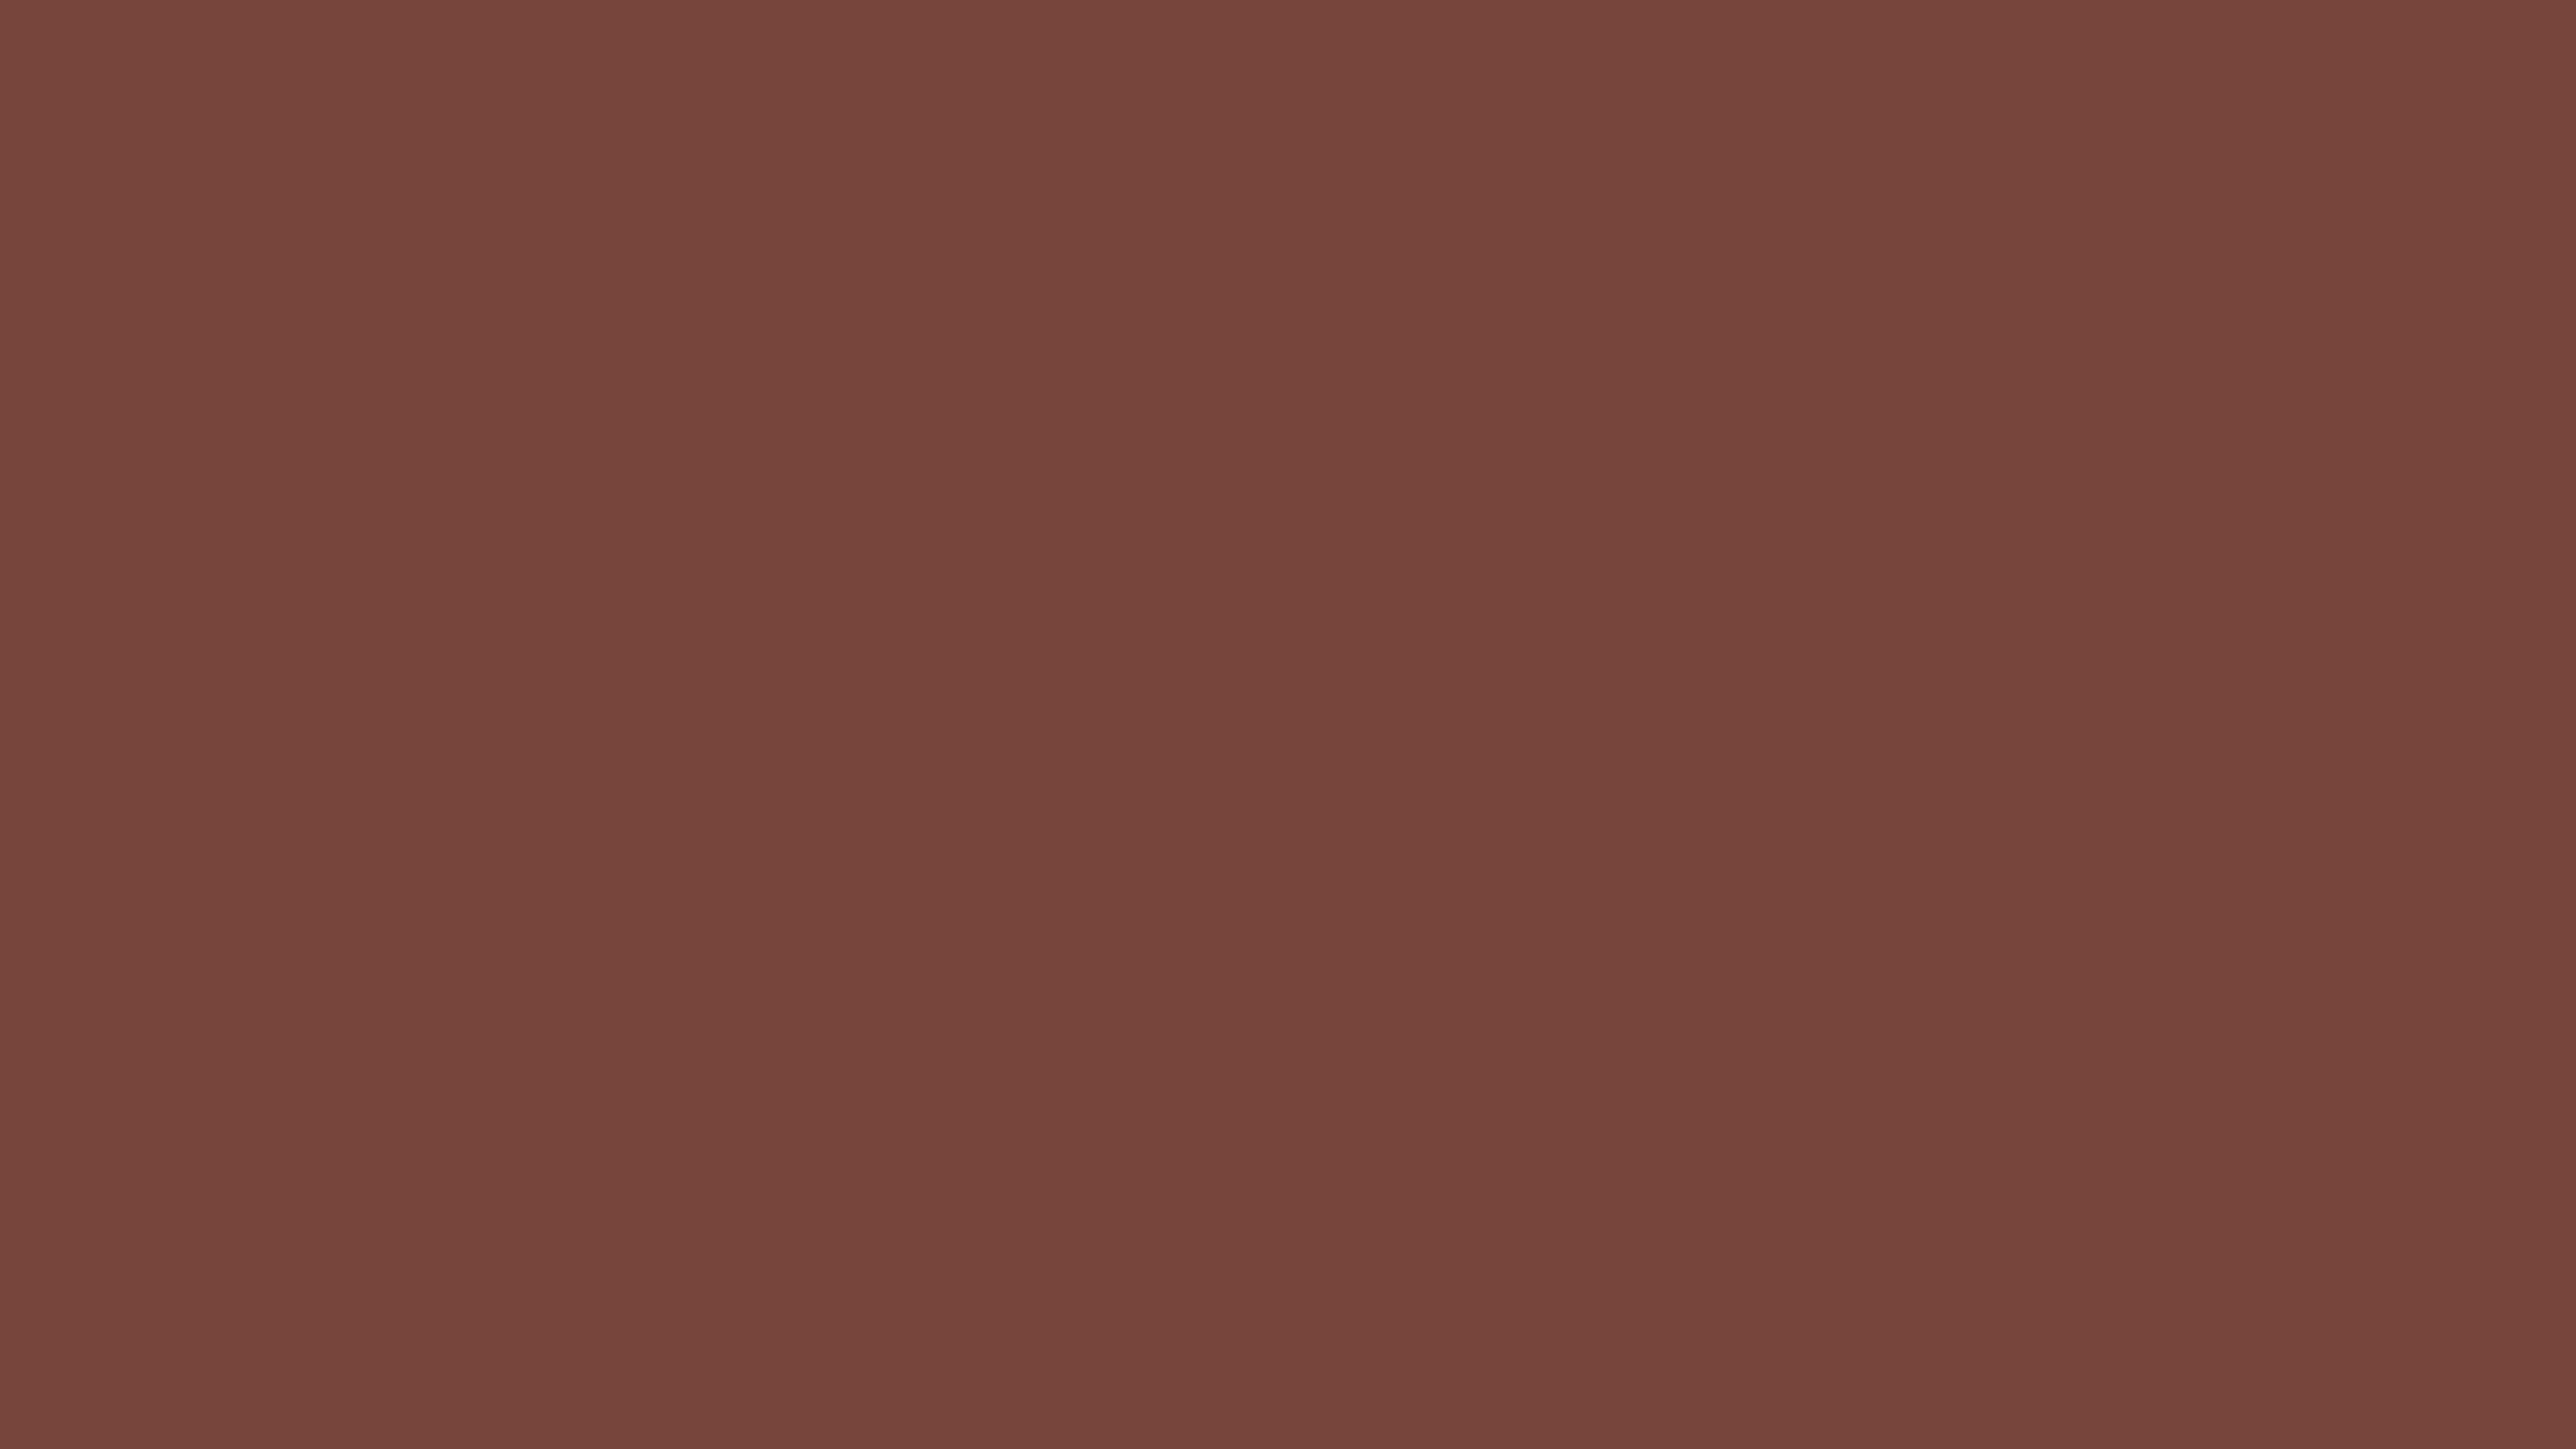 7680x4320 Medium Tuscan Red Solid Color Background